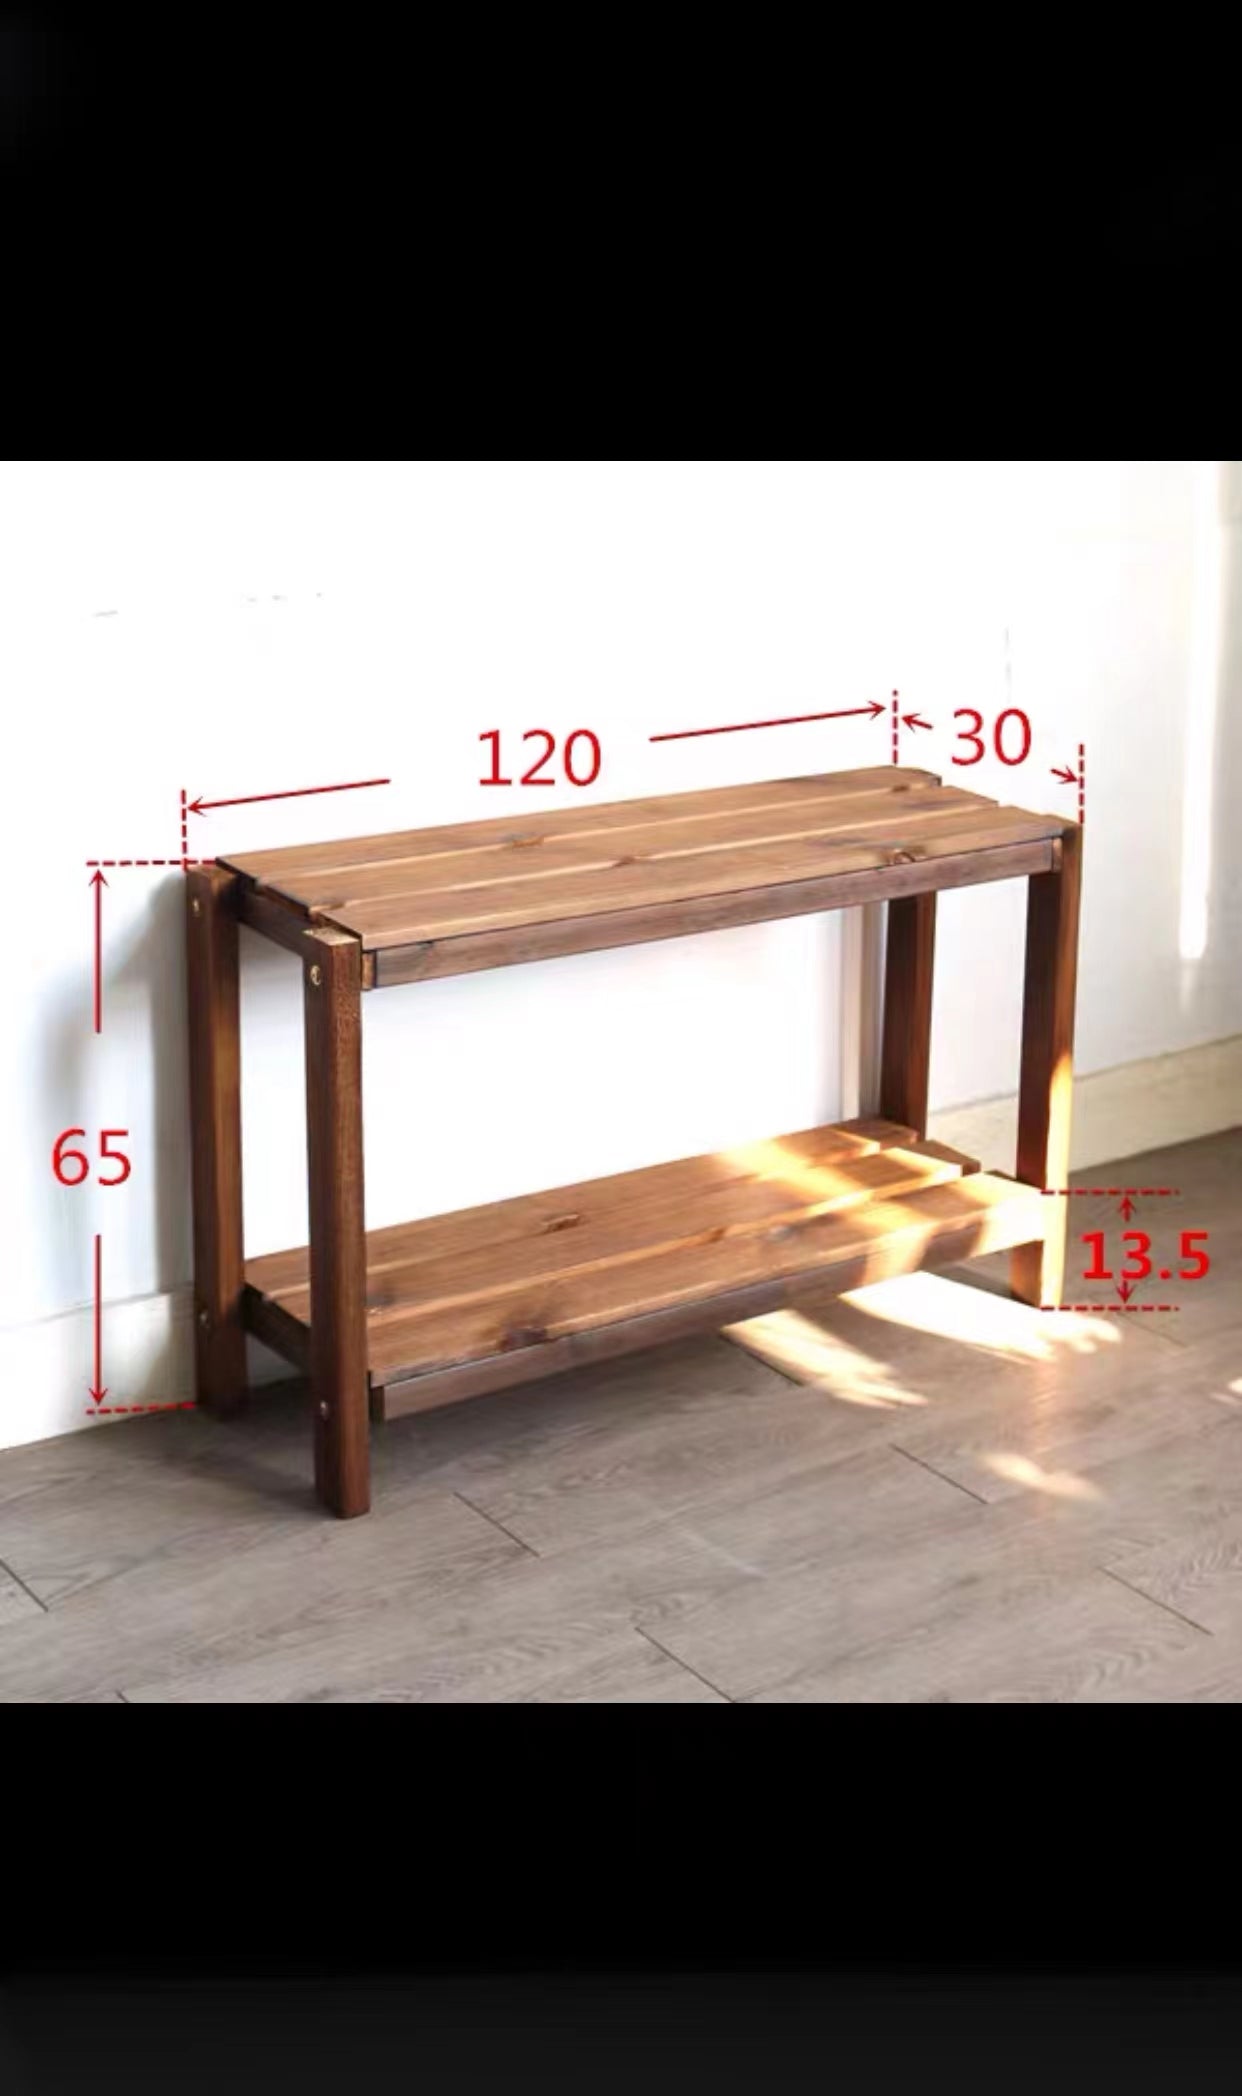 Multi Layers Wood Plant Stand - 4 Seasons Home Gadgets